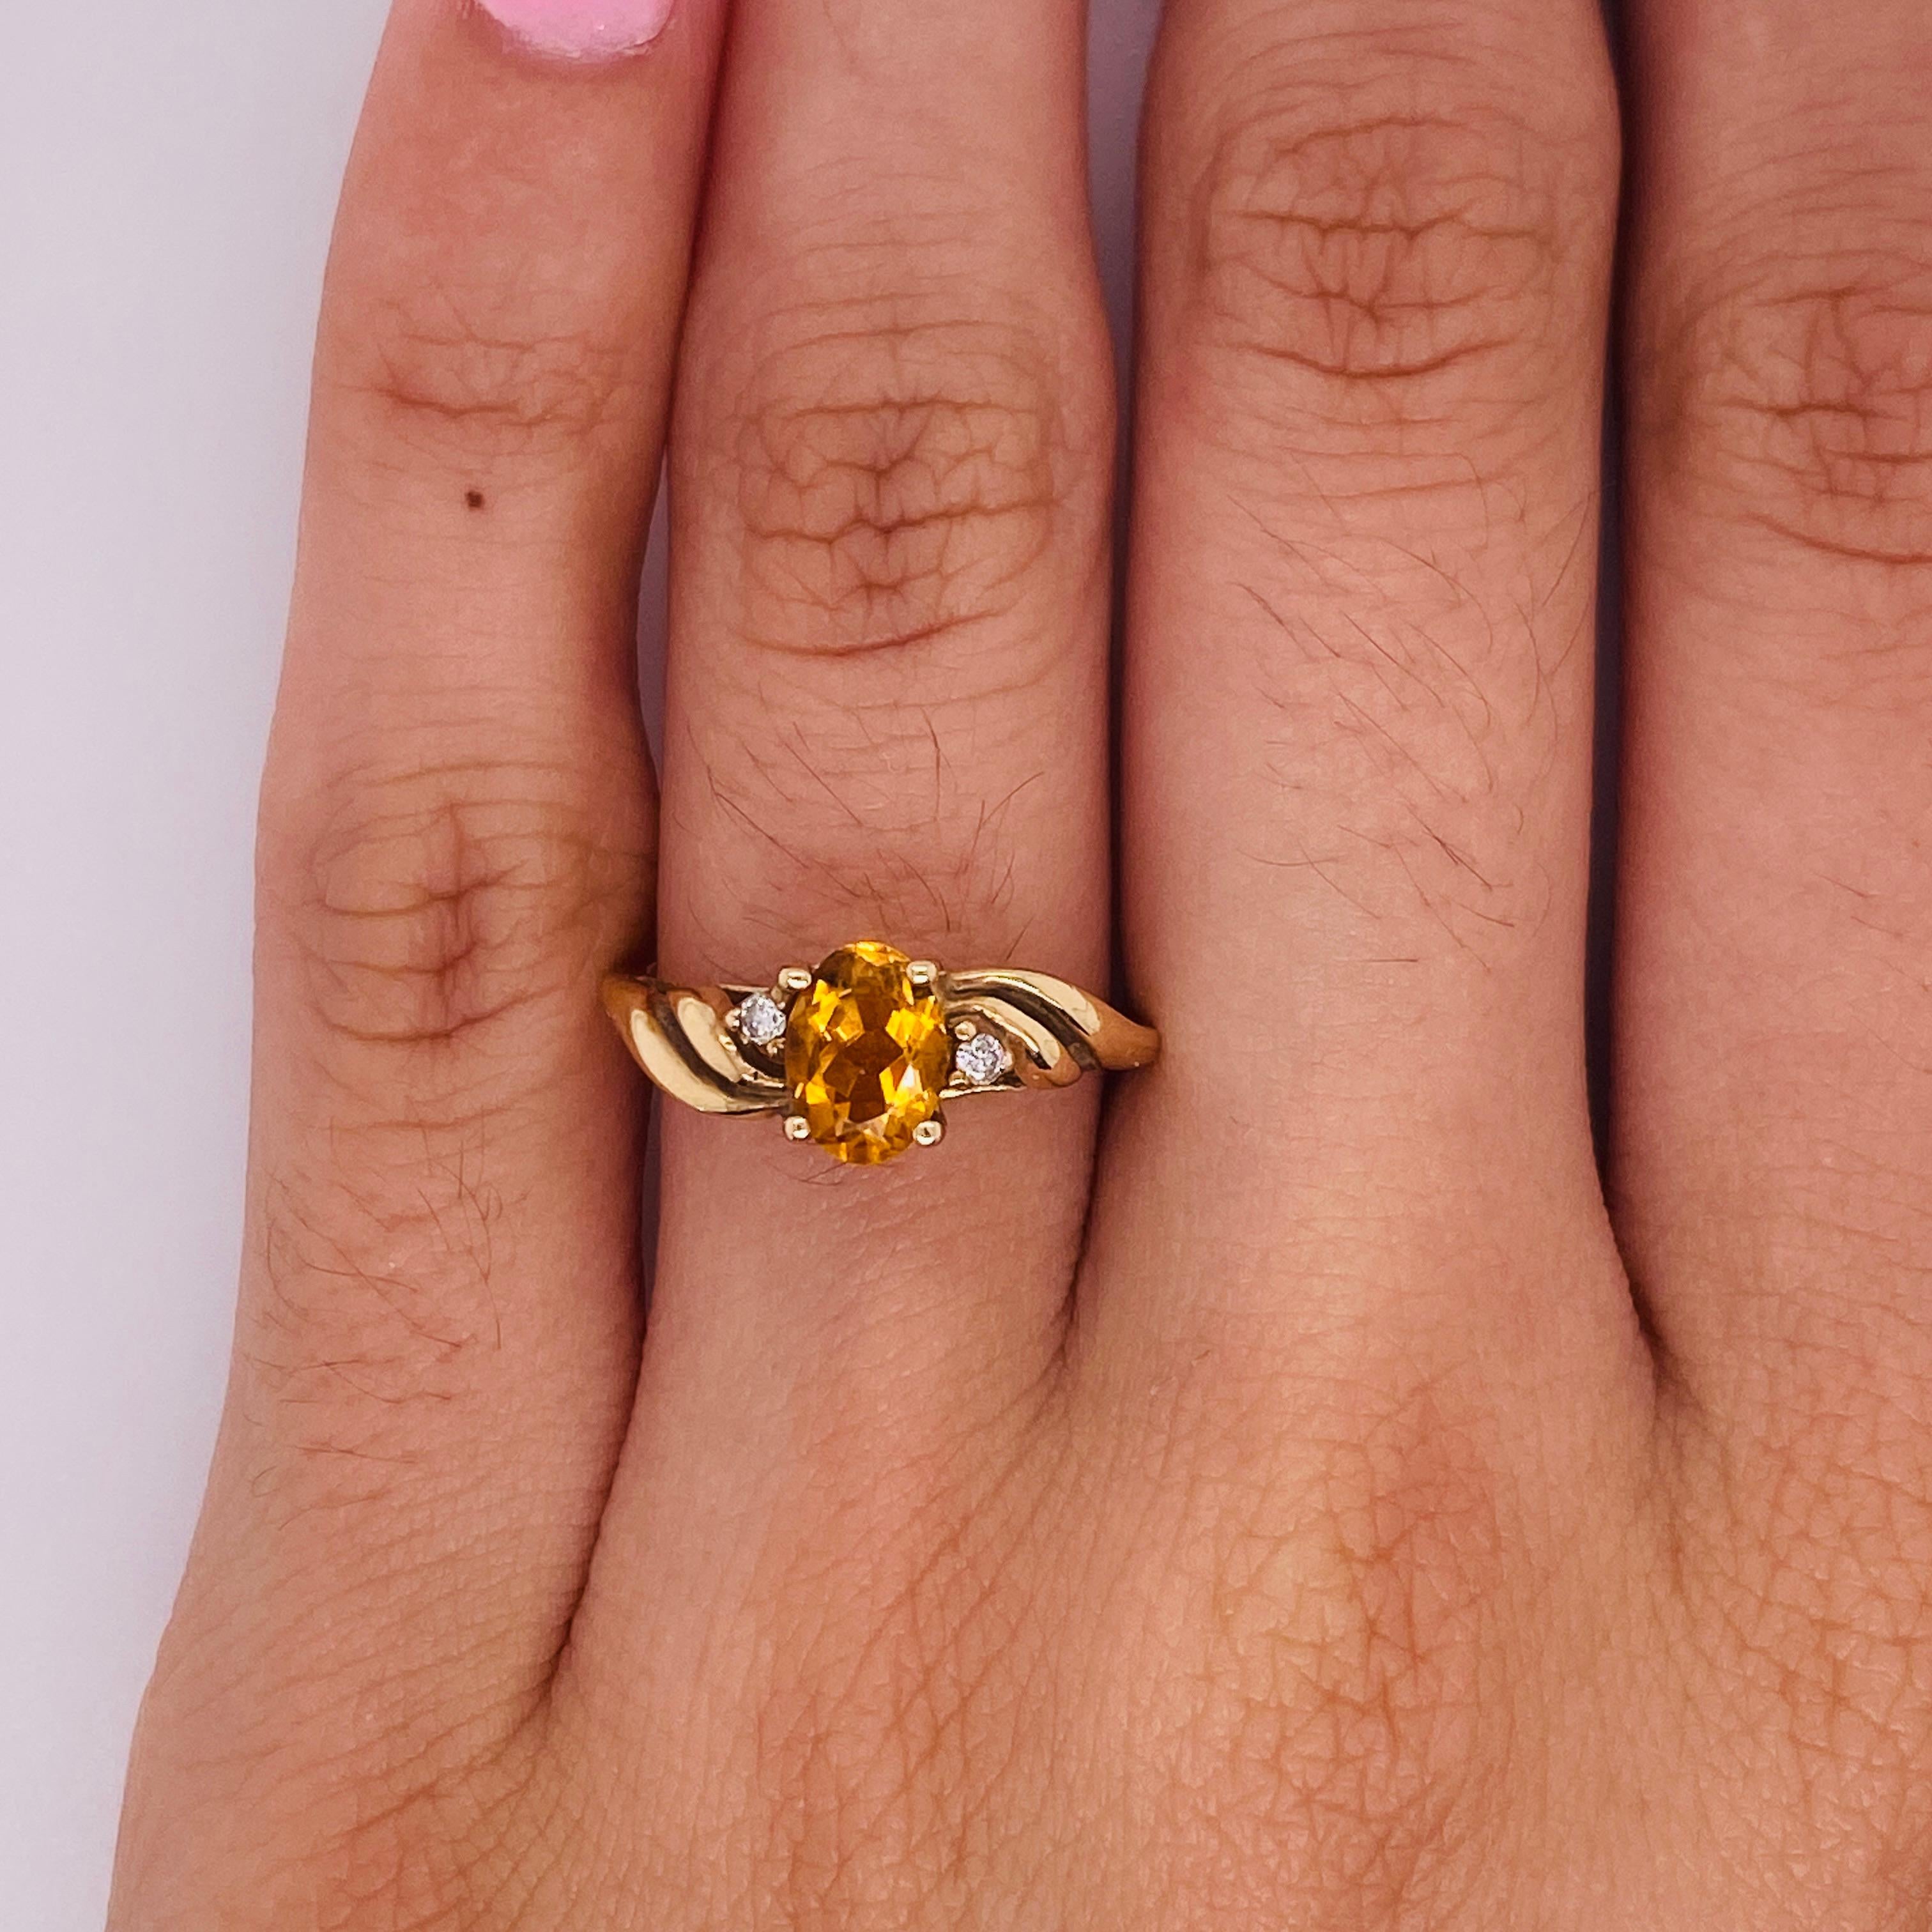 Oval Cut Oval Citrine Swirl Birthstone Ring .72 Cts with Diamonds in 14k Yellow Gold LV For Sale